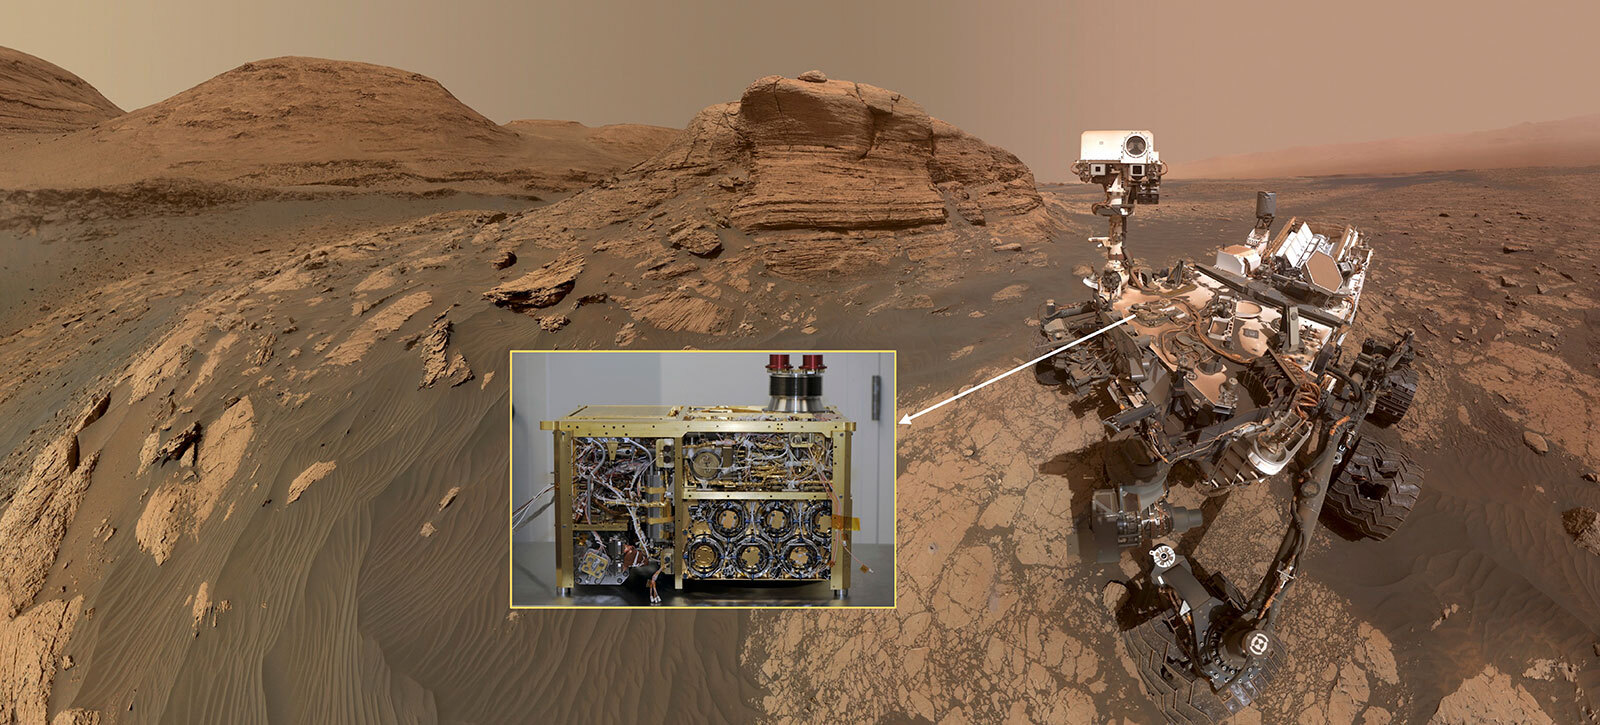 “Selfie” of the Curiosity rover with inset showing the SAM instrument prior to installation on the rover.